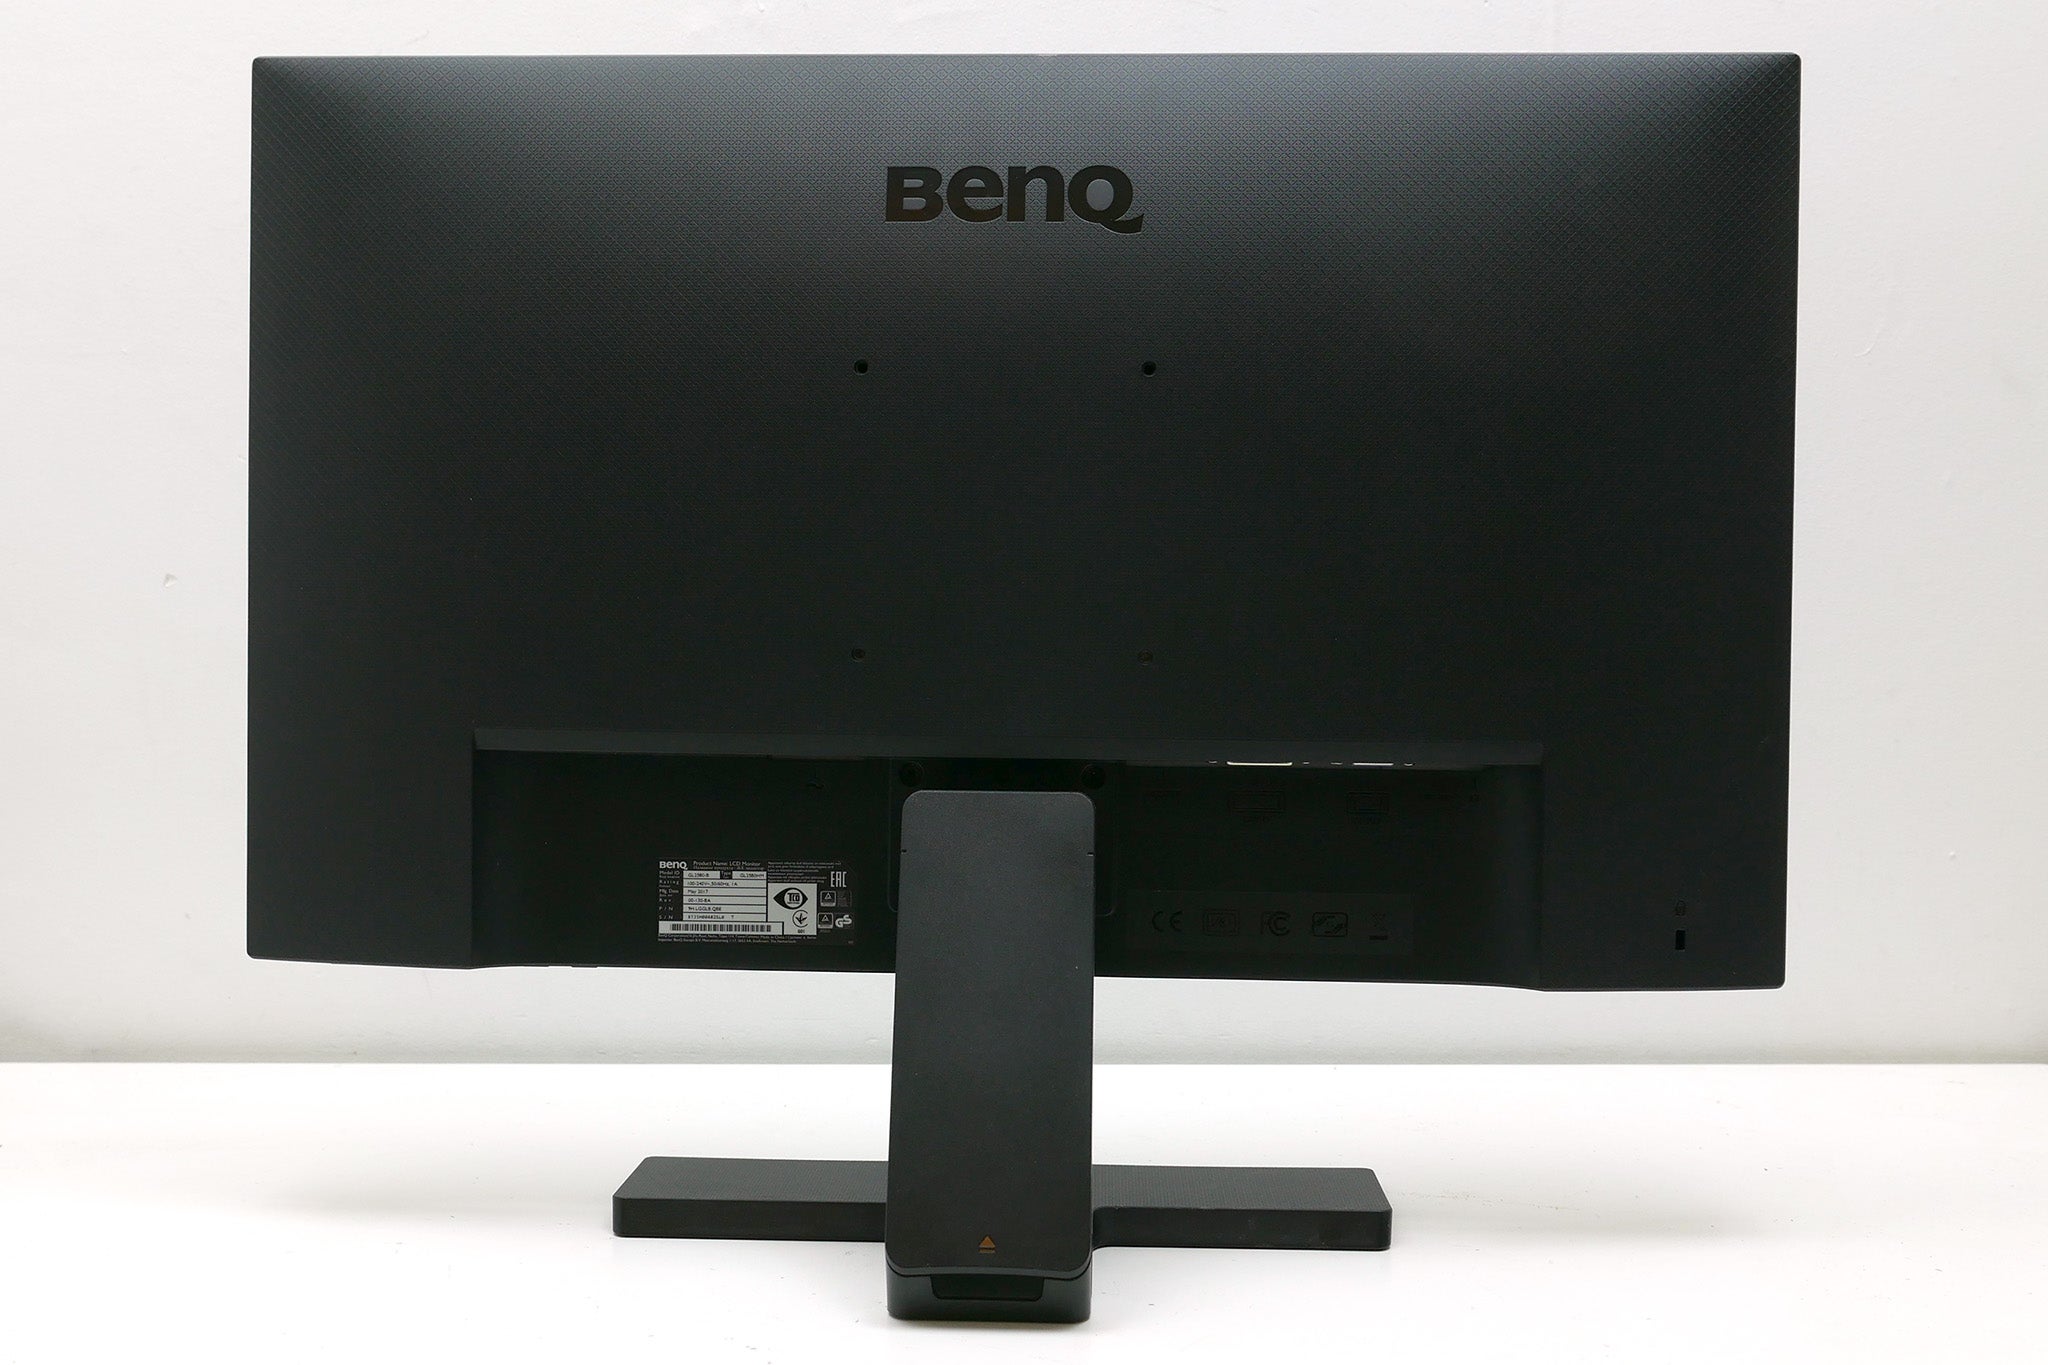 Back view of a BenQ GL2580HM monitor on a stand